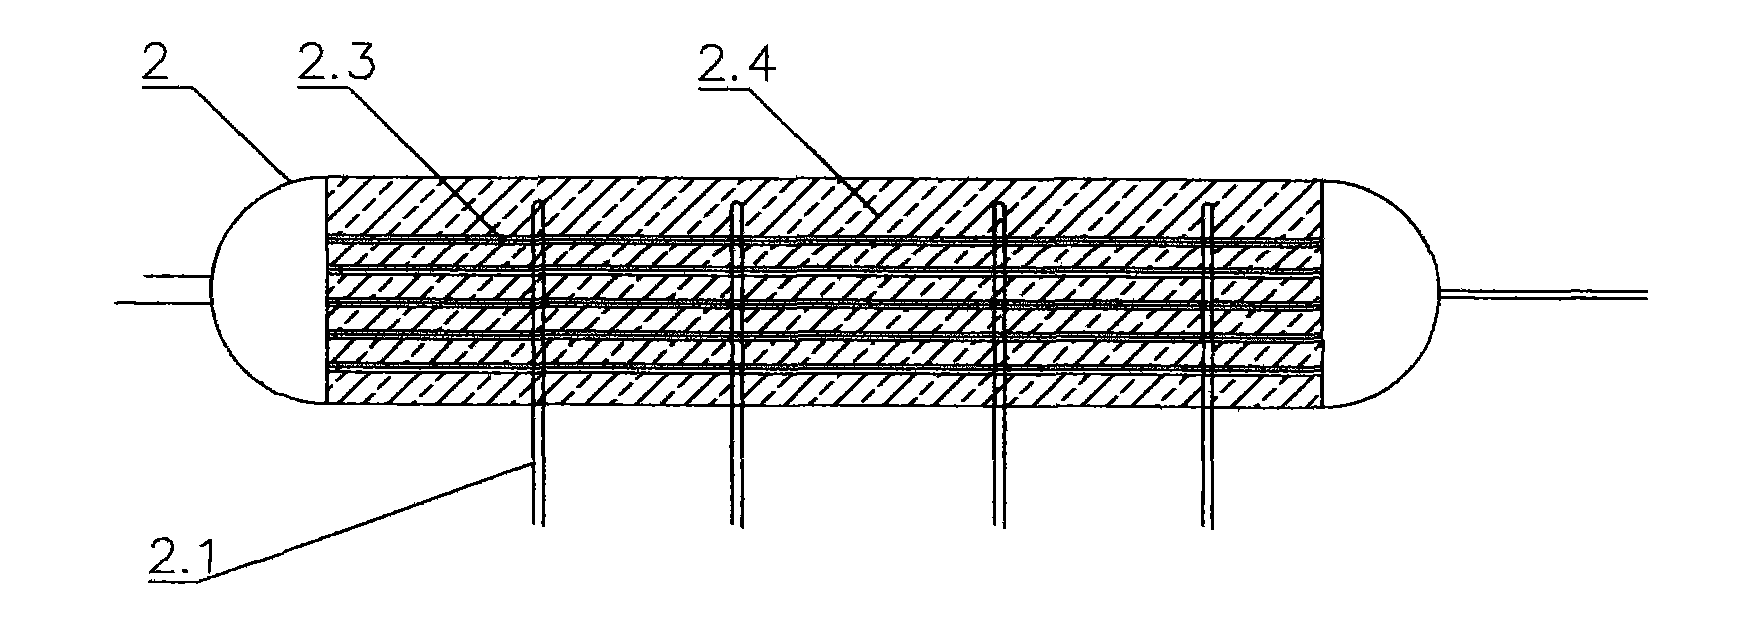 Device for generating, refrigerating and heat supplying by solar energy and biomass energy